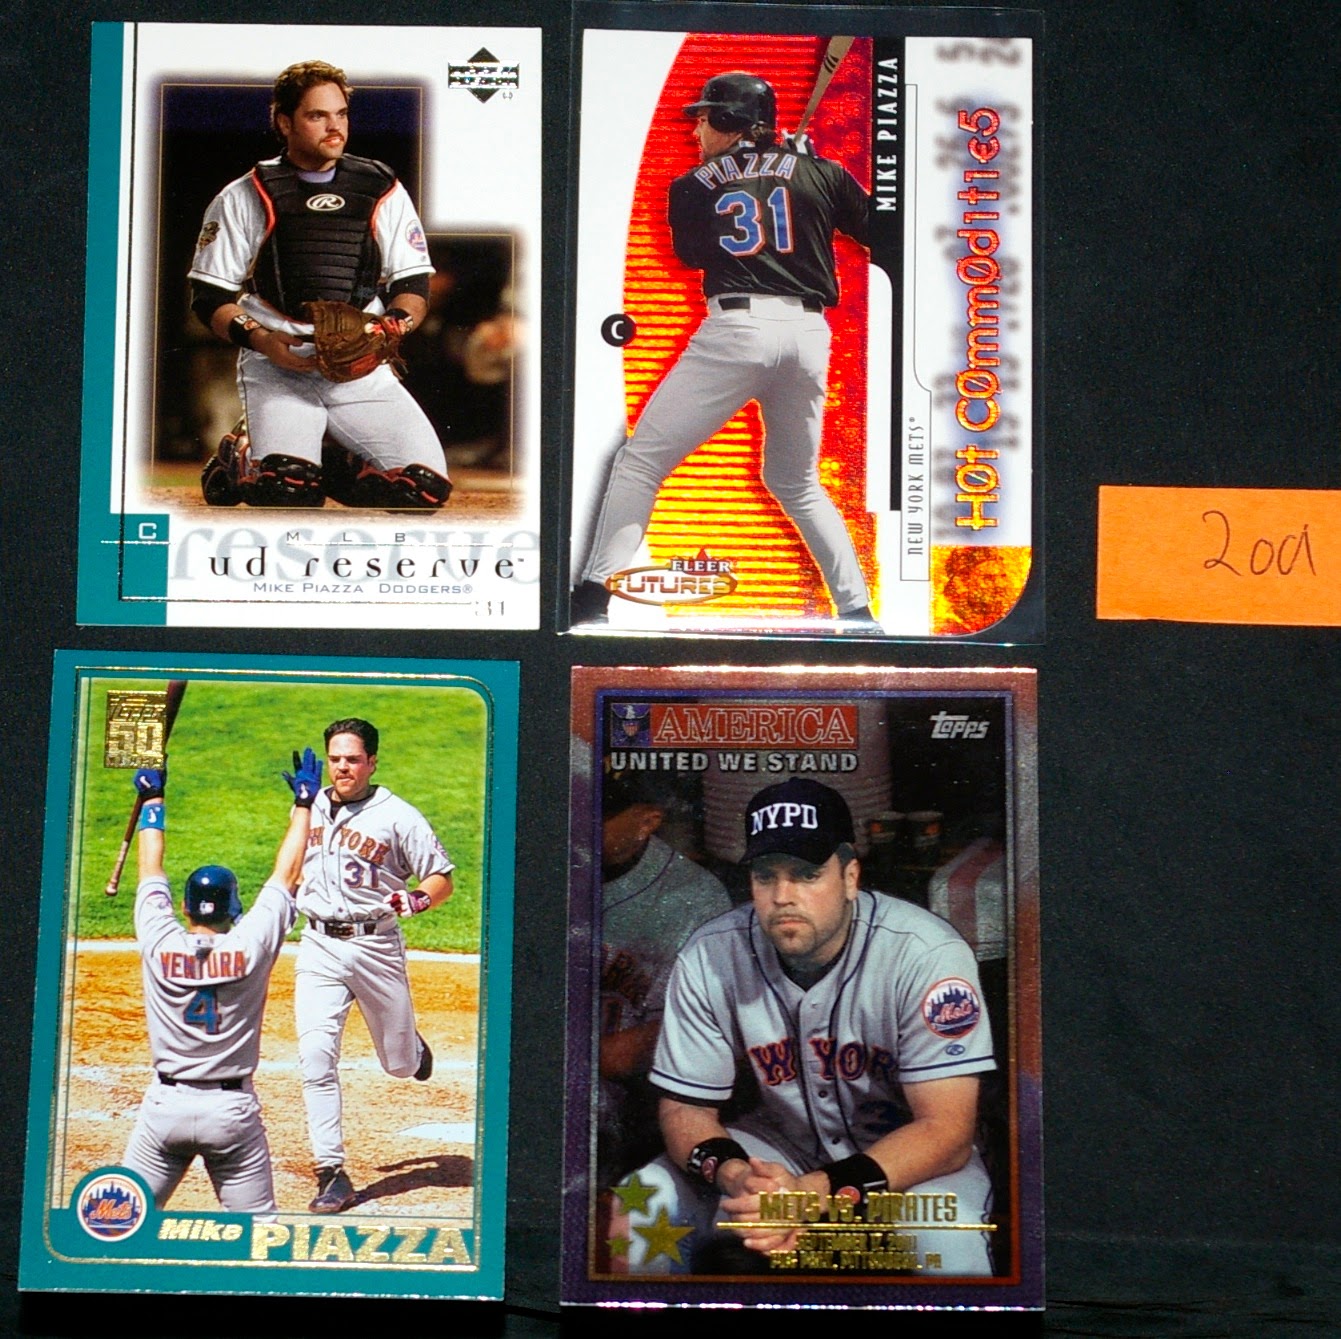 Baseball Card Breakdown: The joy of a completed PC: Mike Piazza